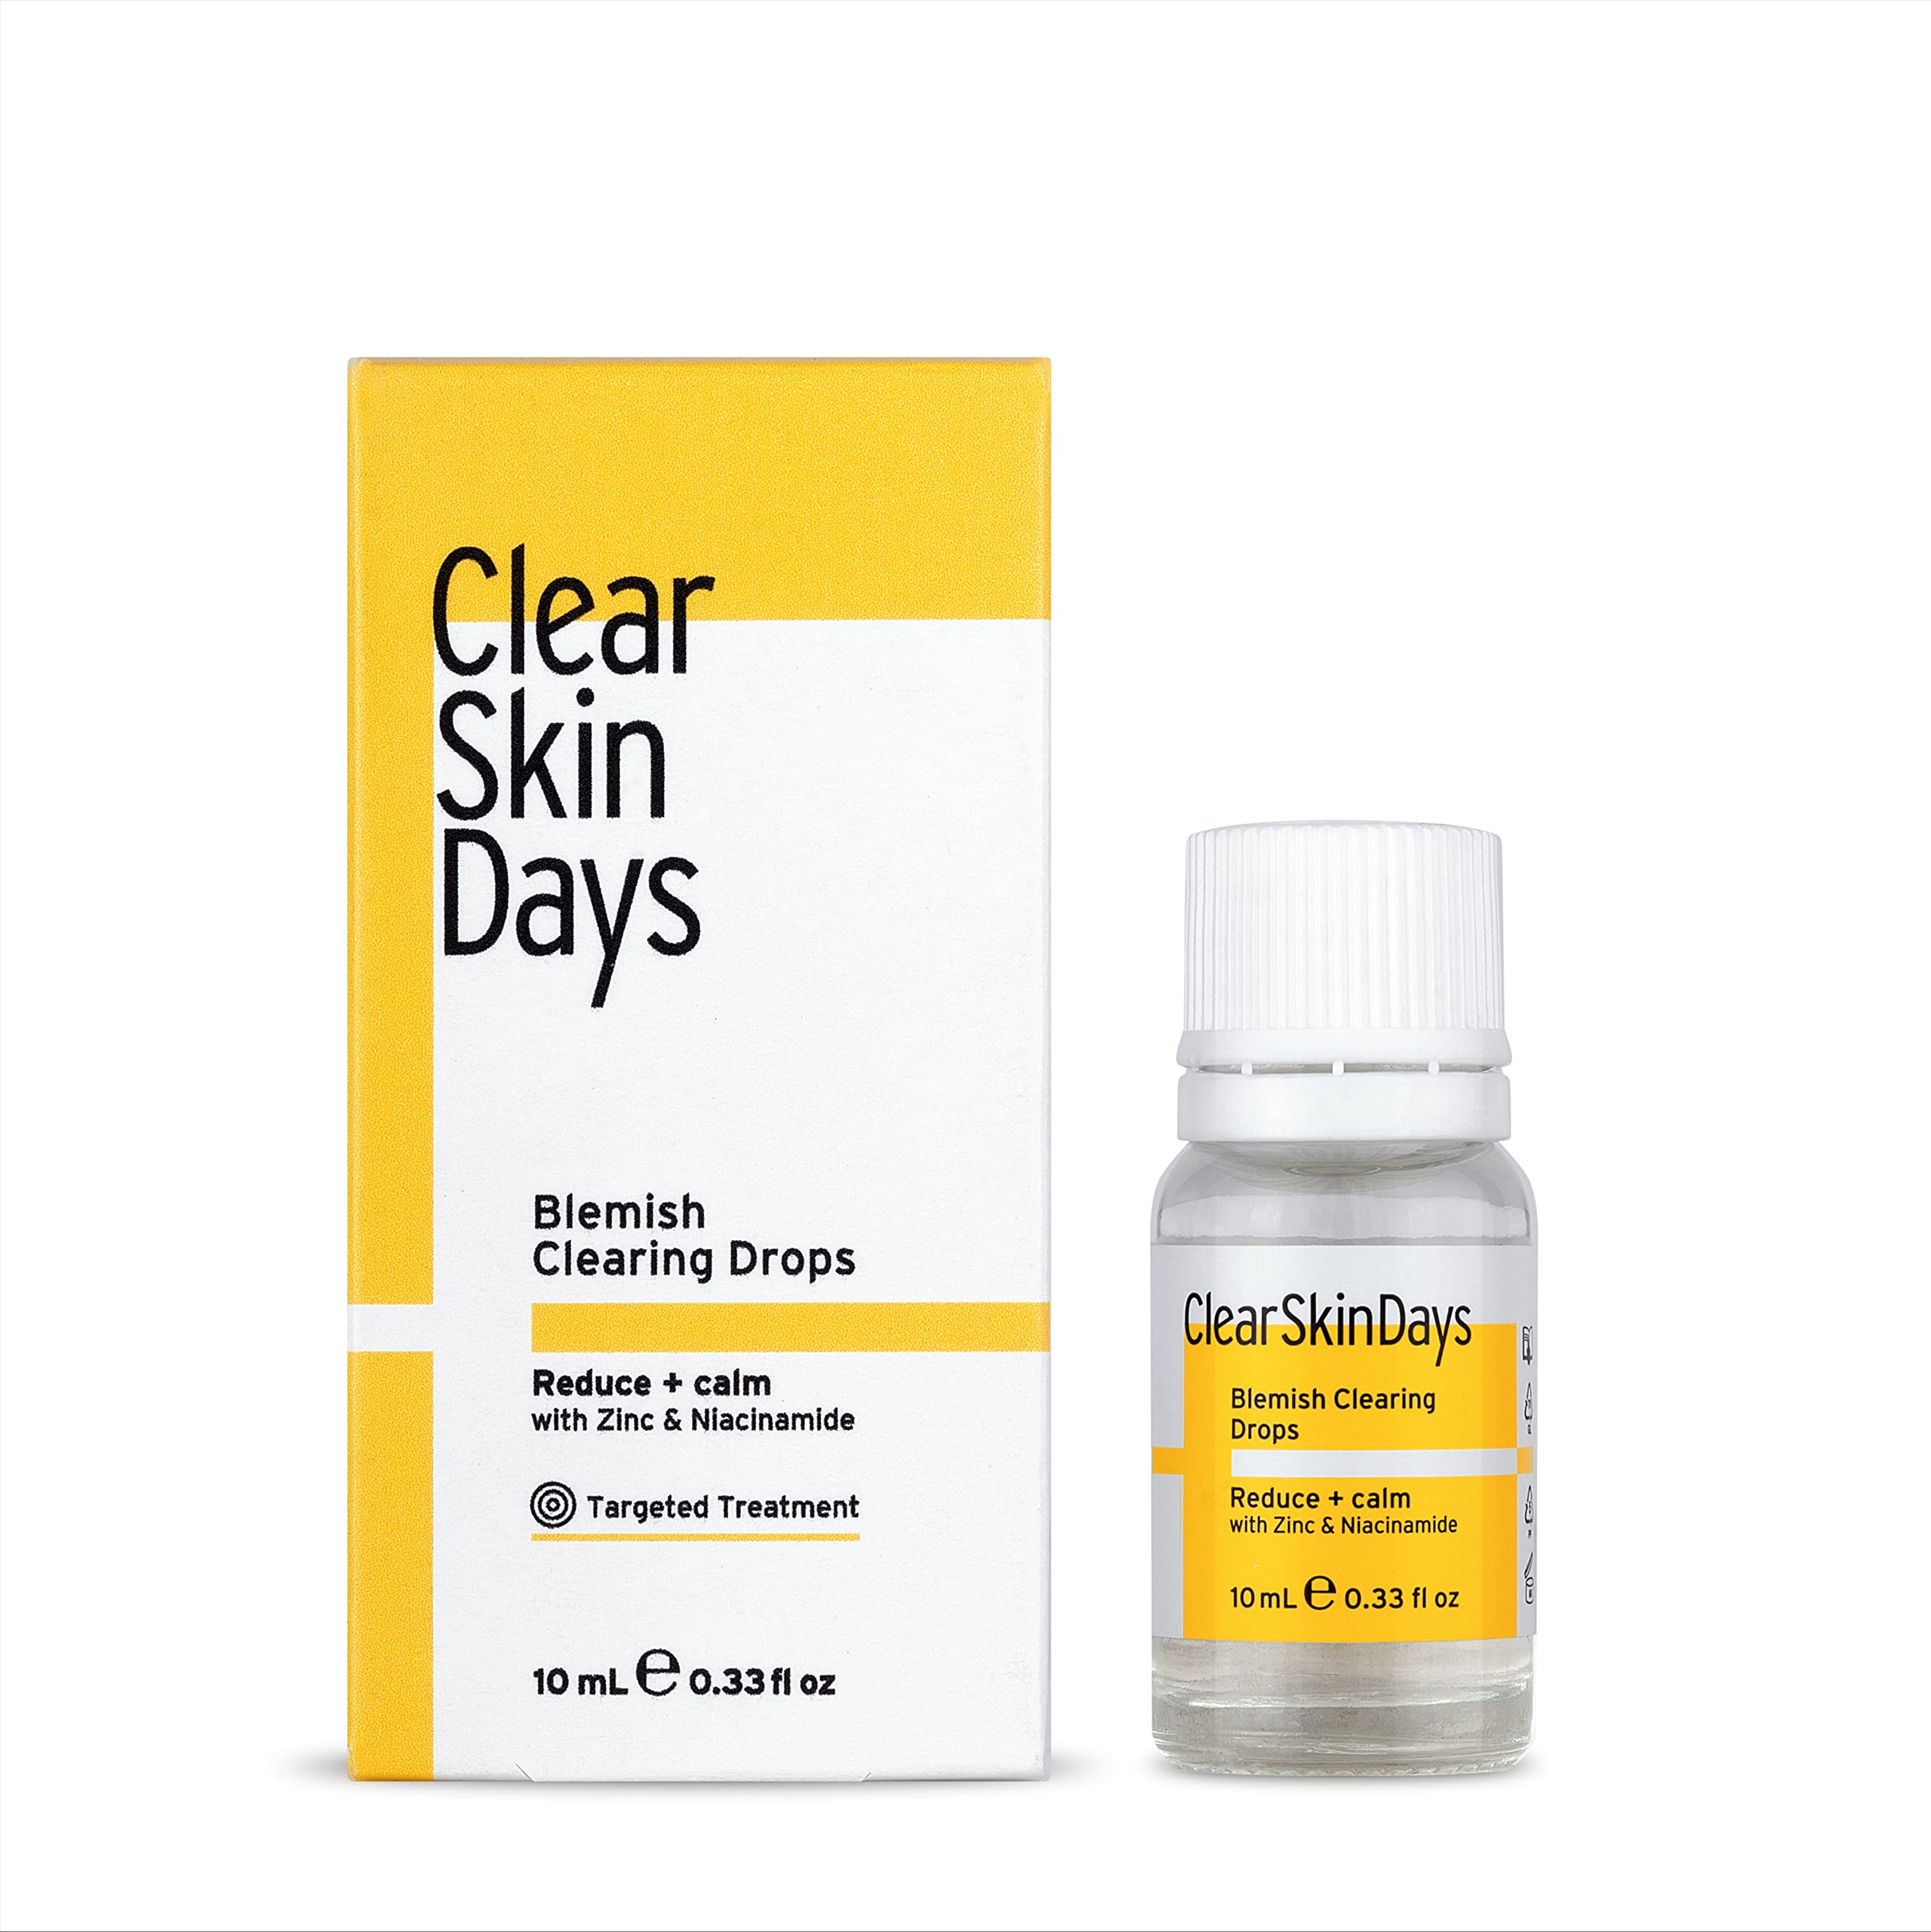 Clear Skin Days 2% Niacinamide, 2% Salicylic Acid, & 1% Zinc Spot, pimple & Acne Treatment - Blemish Clearing Drops - Reduce Breakouts, Calm and Repair Skin